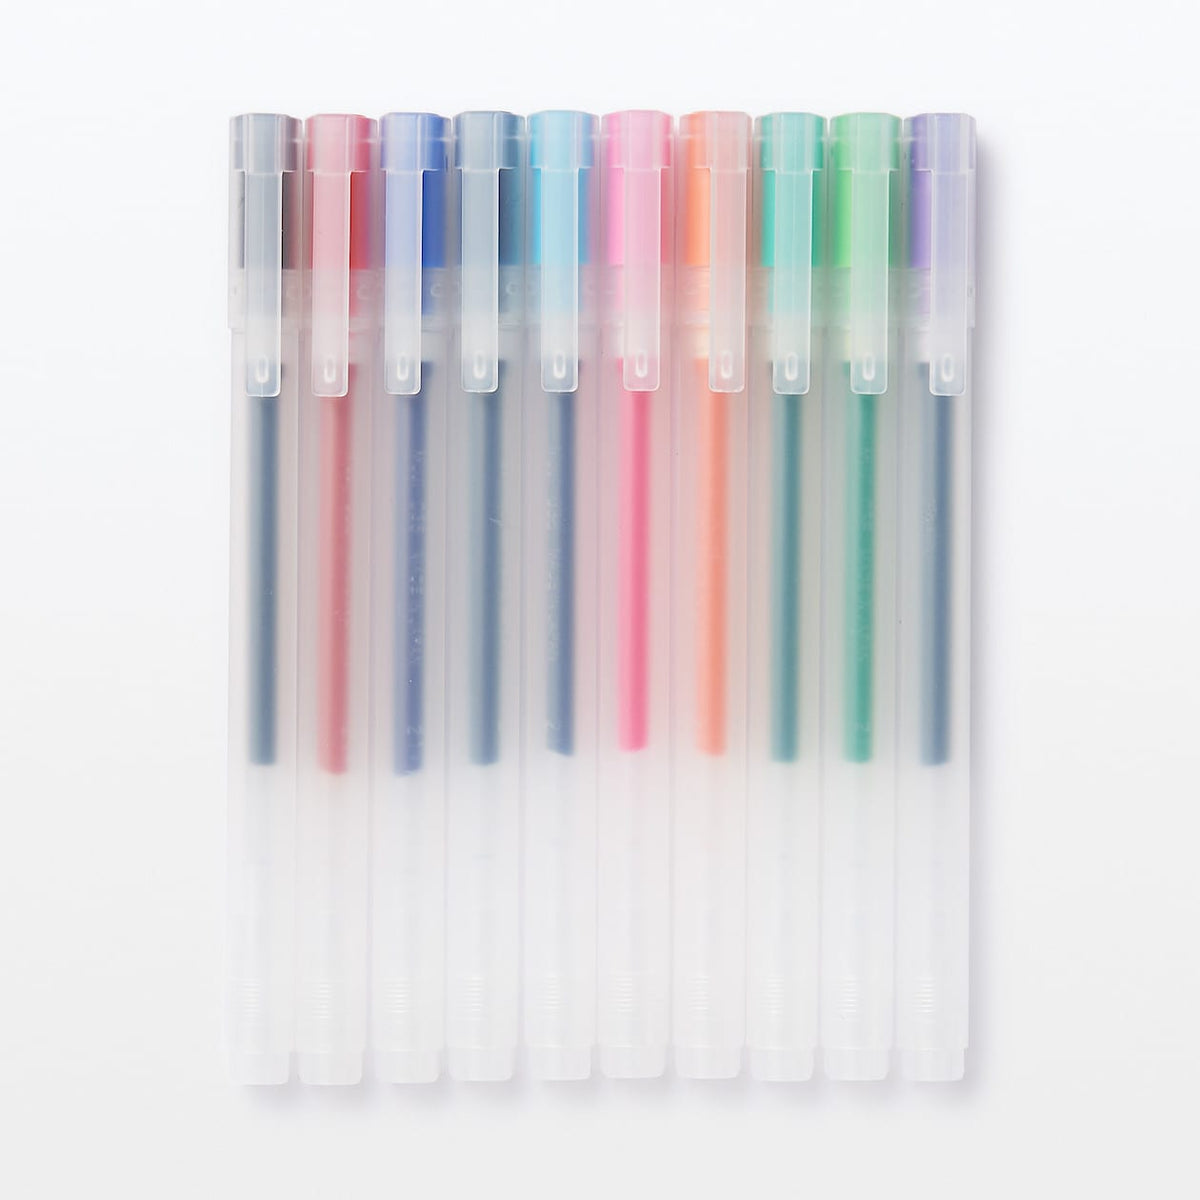 Set of 10 Color Pens MUJI Gel Ink Ball Point Pen 0.5 Knock Type Made In  Japan